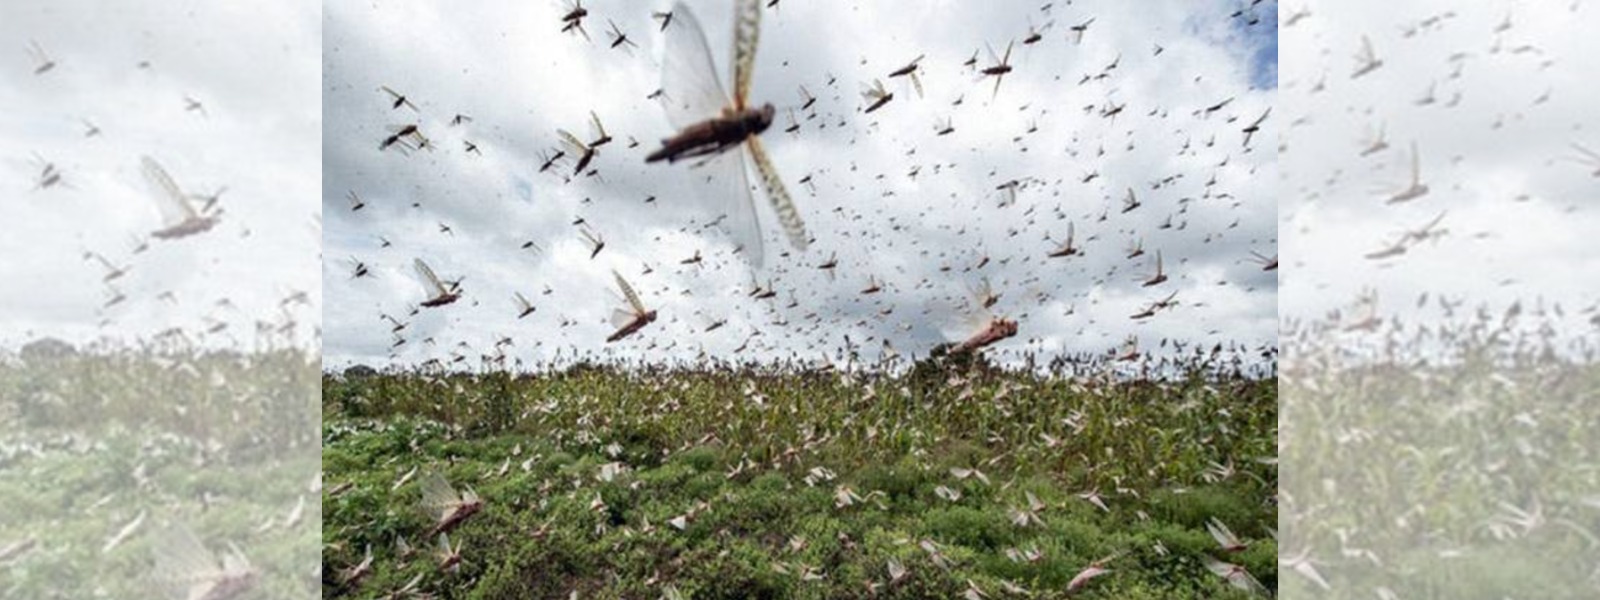 Swarms of crop-eating locusts spreading in India may reach Sri Lanka as well: a warning from Dept. of Agriculture